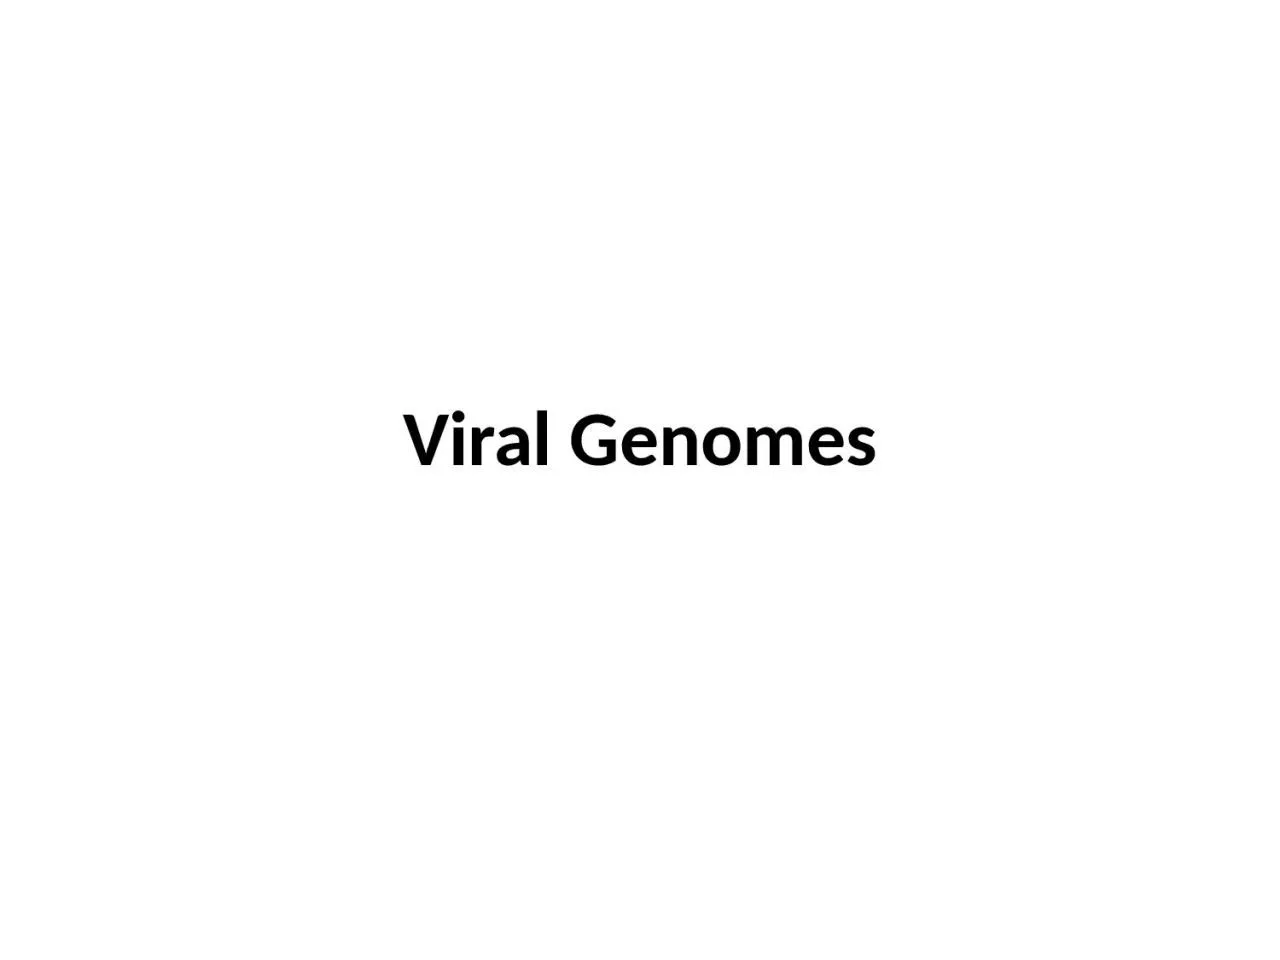 Viral Genomes Virus A virus is a non-cellular particle made up of genetic material and